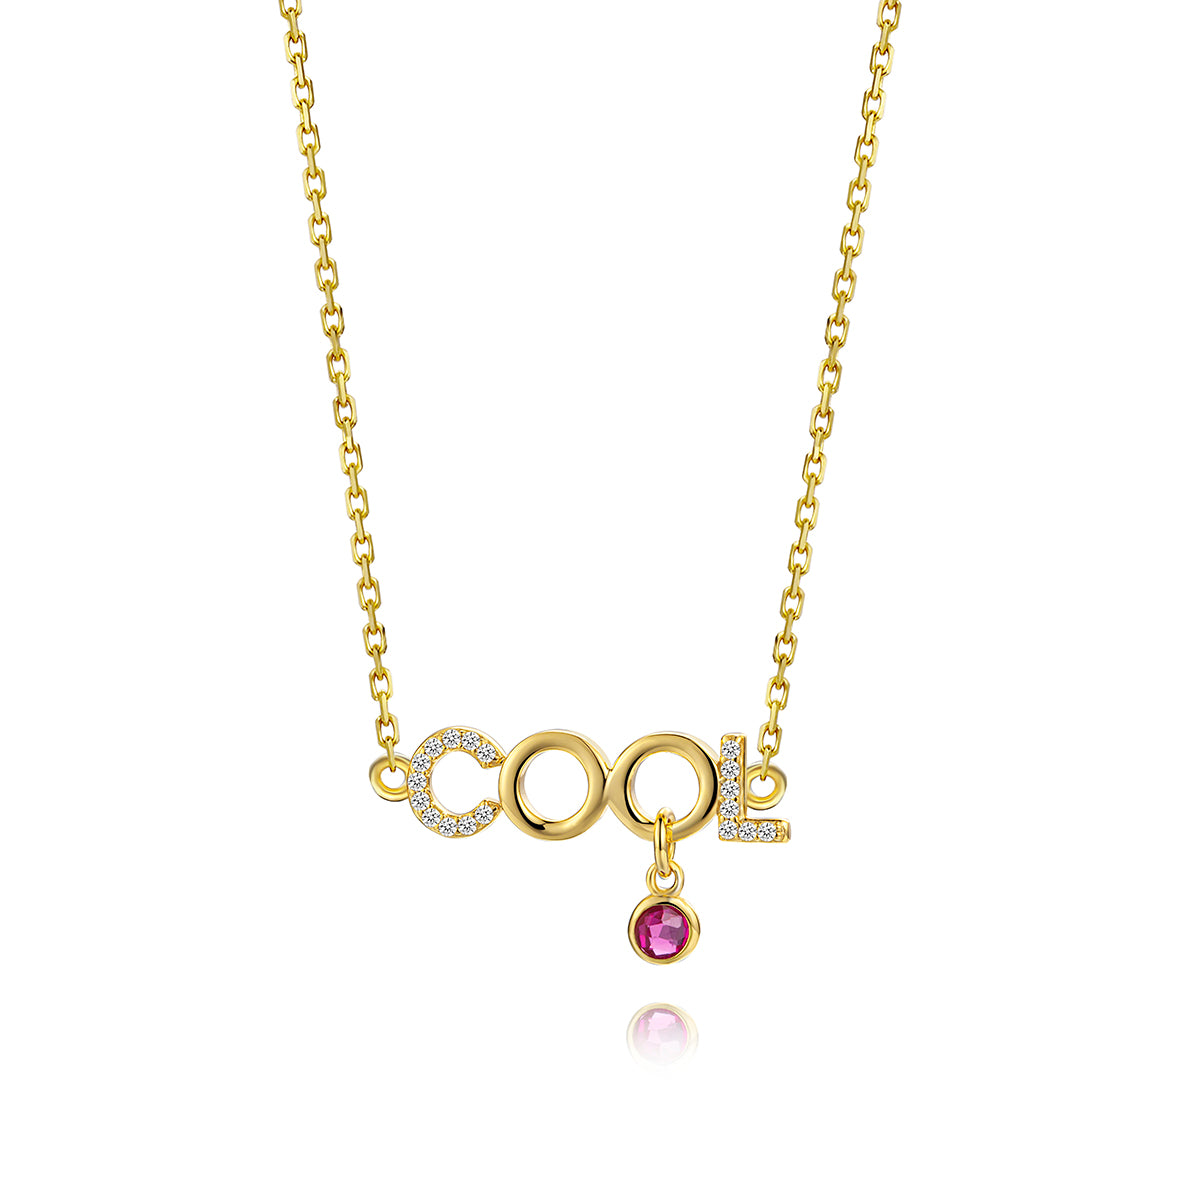 14K Gold Cool Necklace